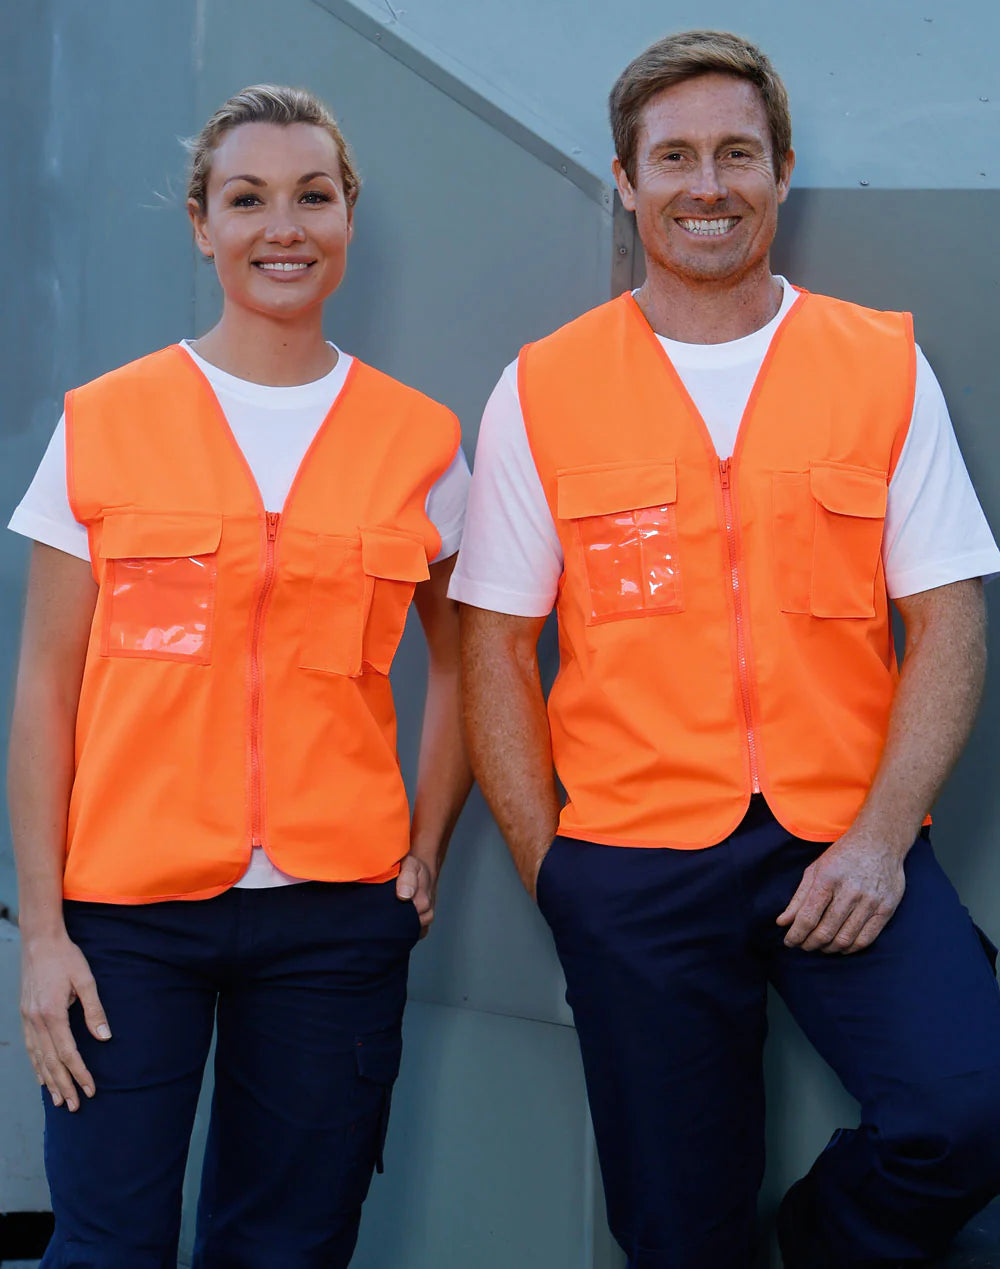 Winning Spirit High Visibility Safety Vest With ID Pocket (SW41)